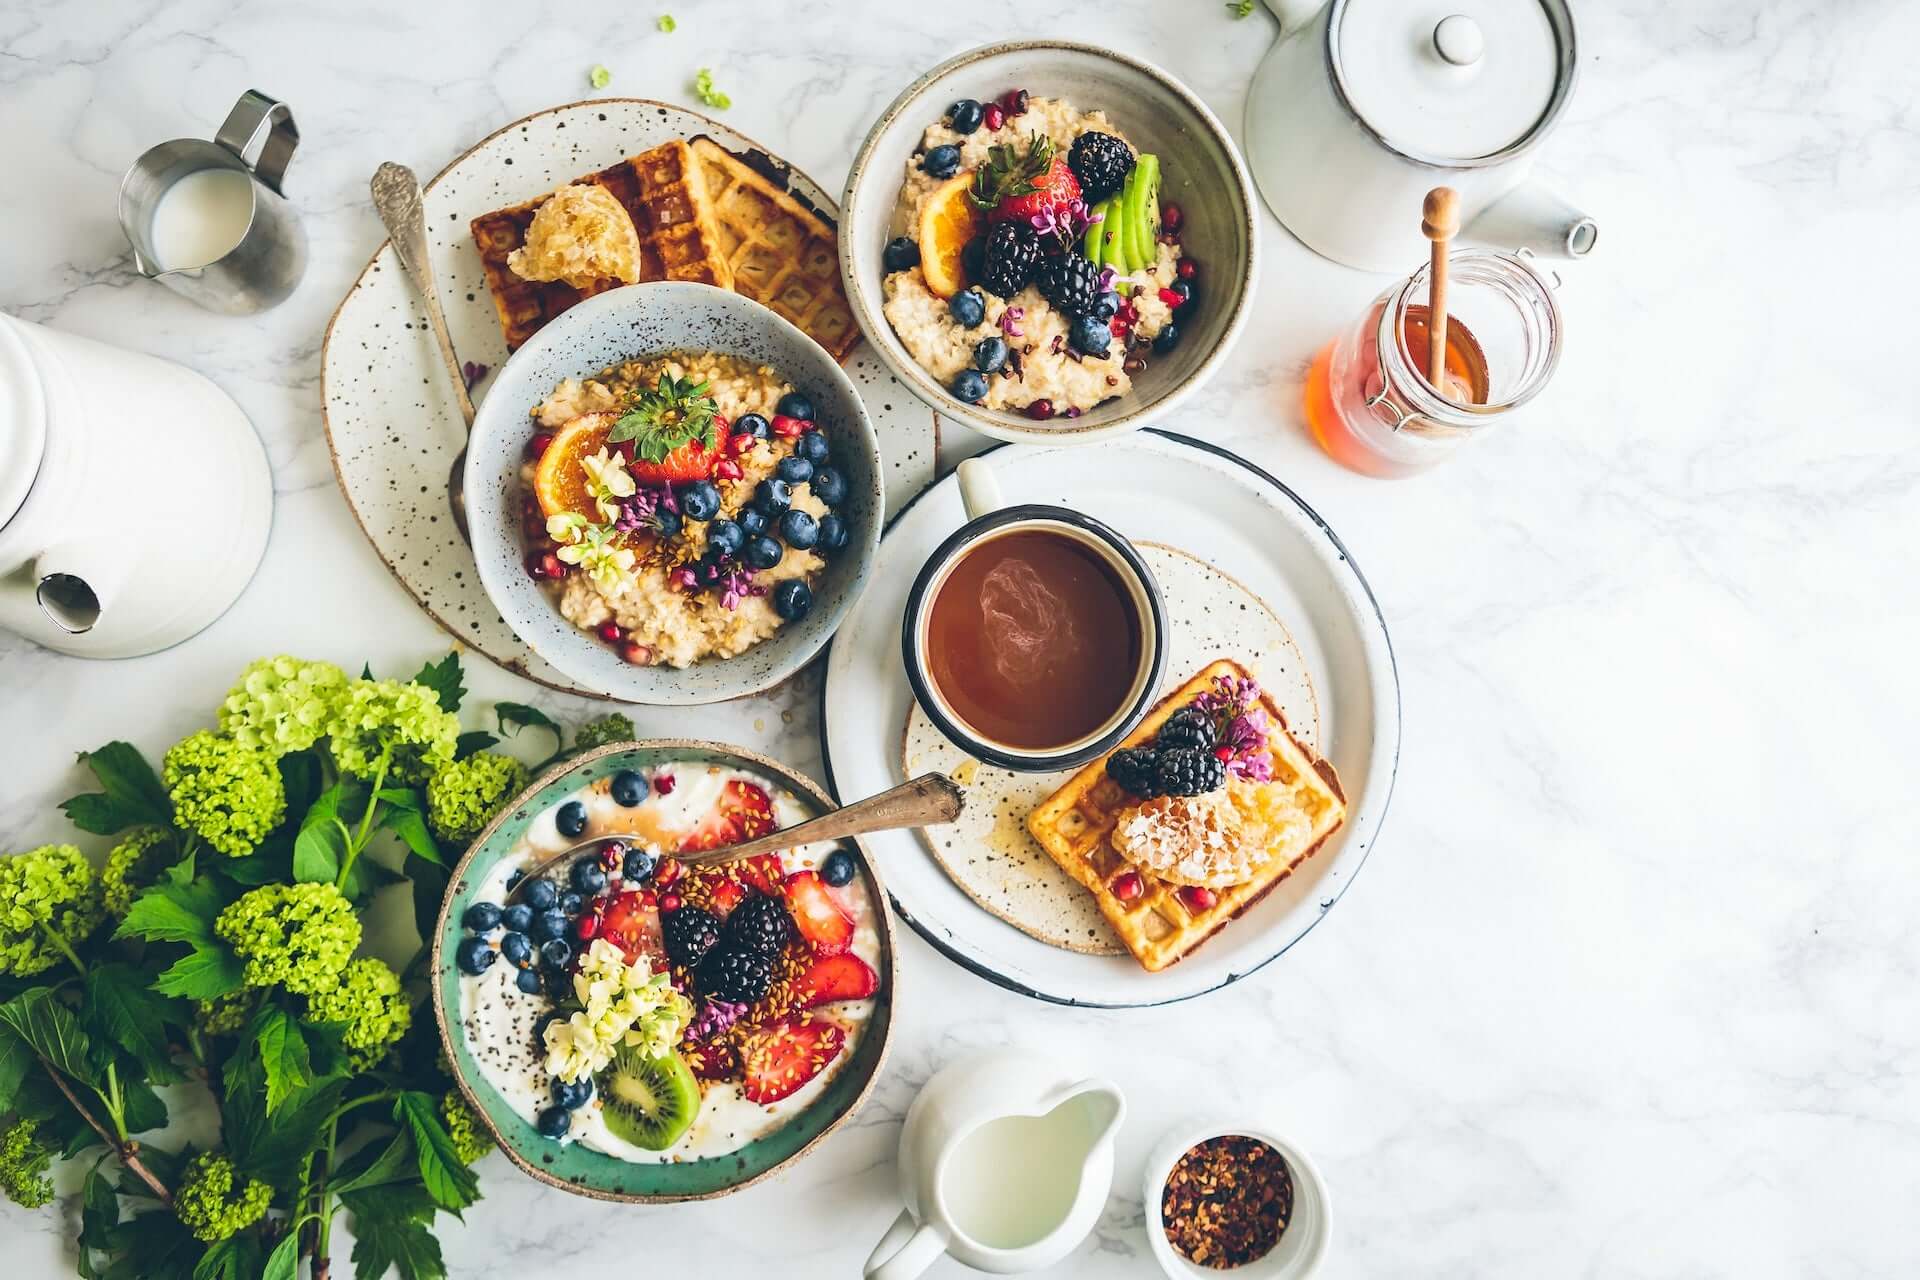 A spread of various brunch foods including fruit and waffles.